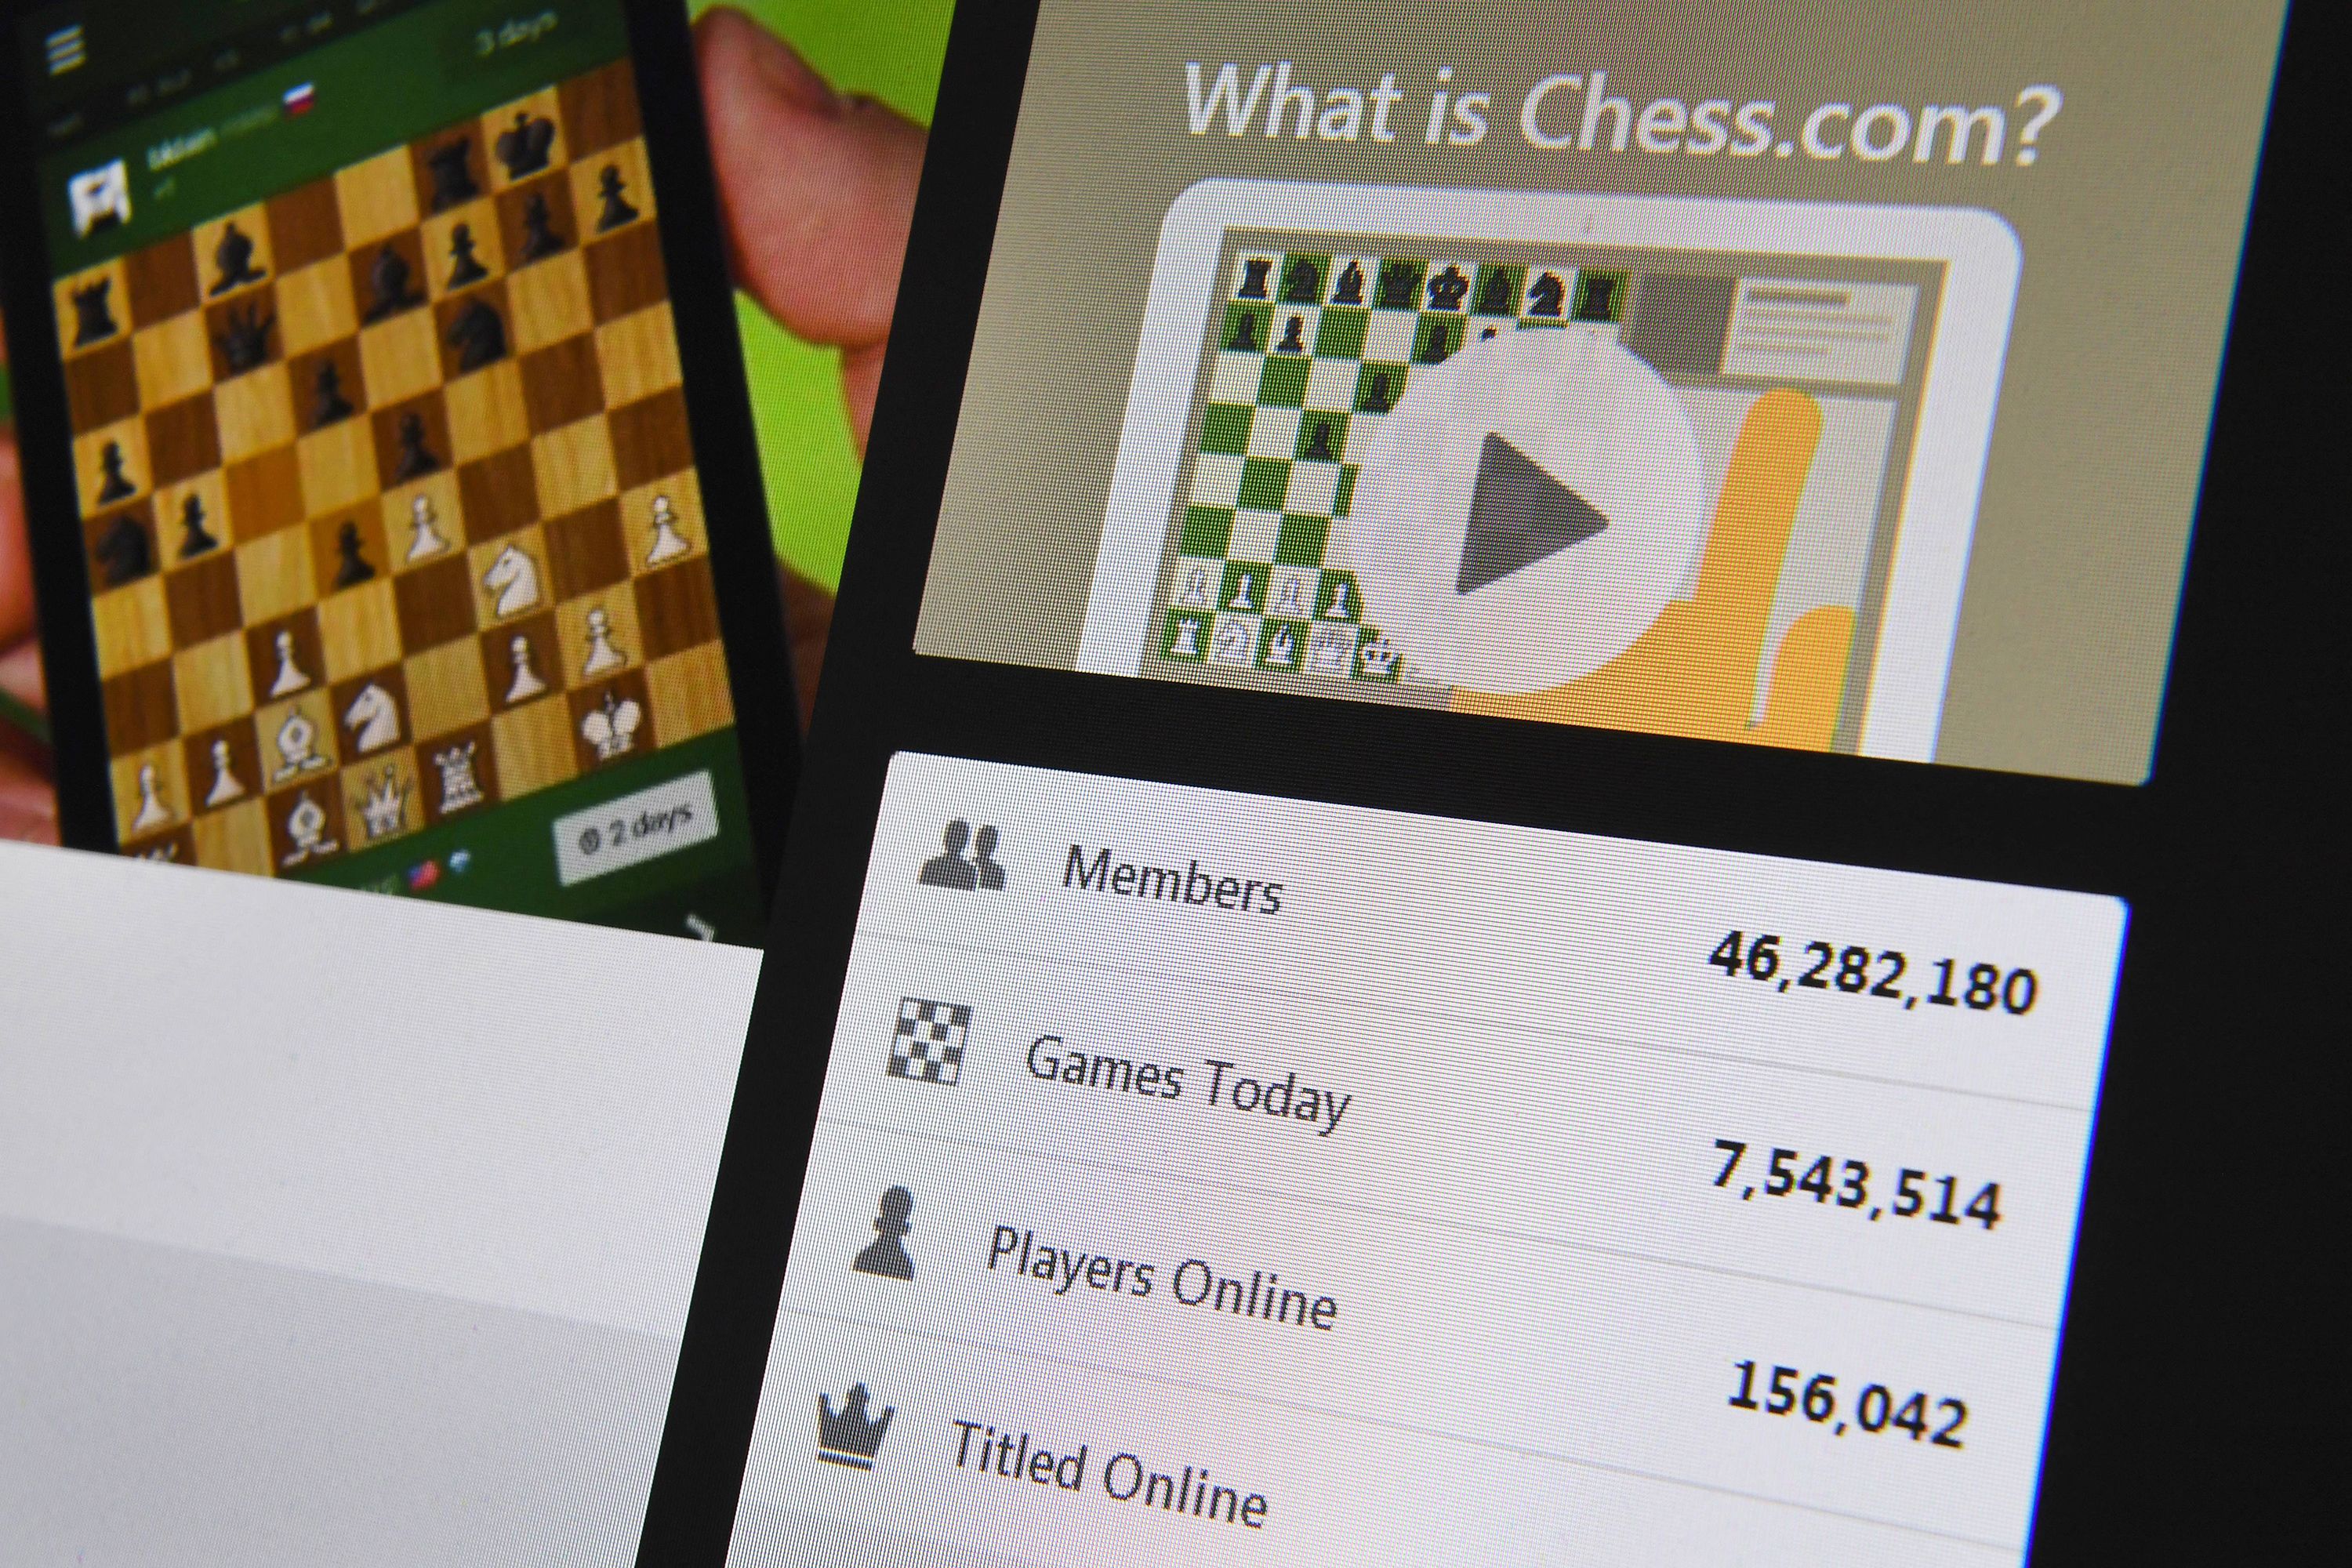 UPDATED] 10 Minute Chess Now Rapid Rated, Bullet Ratings Increased